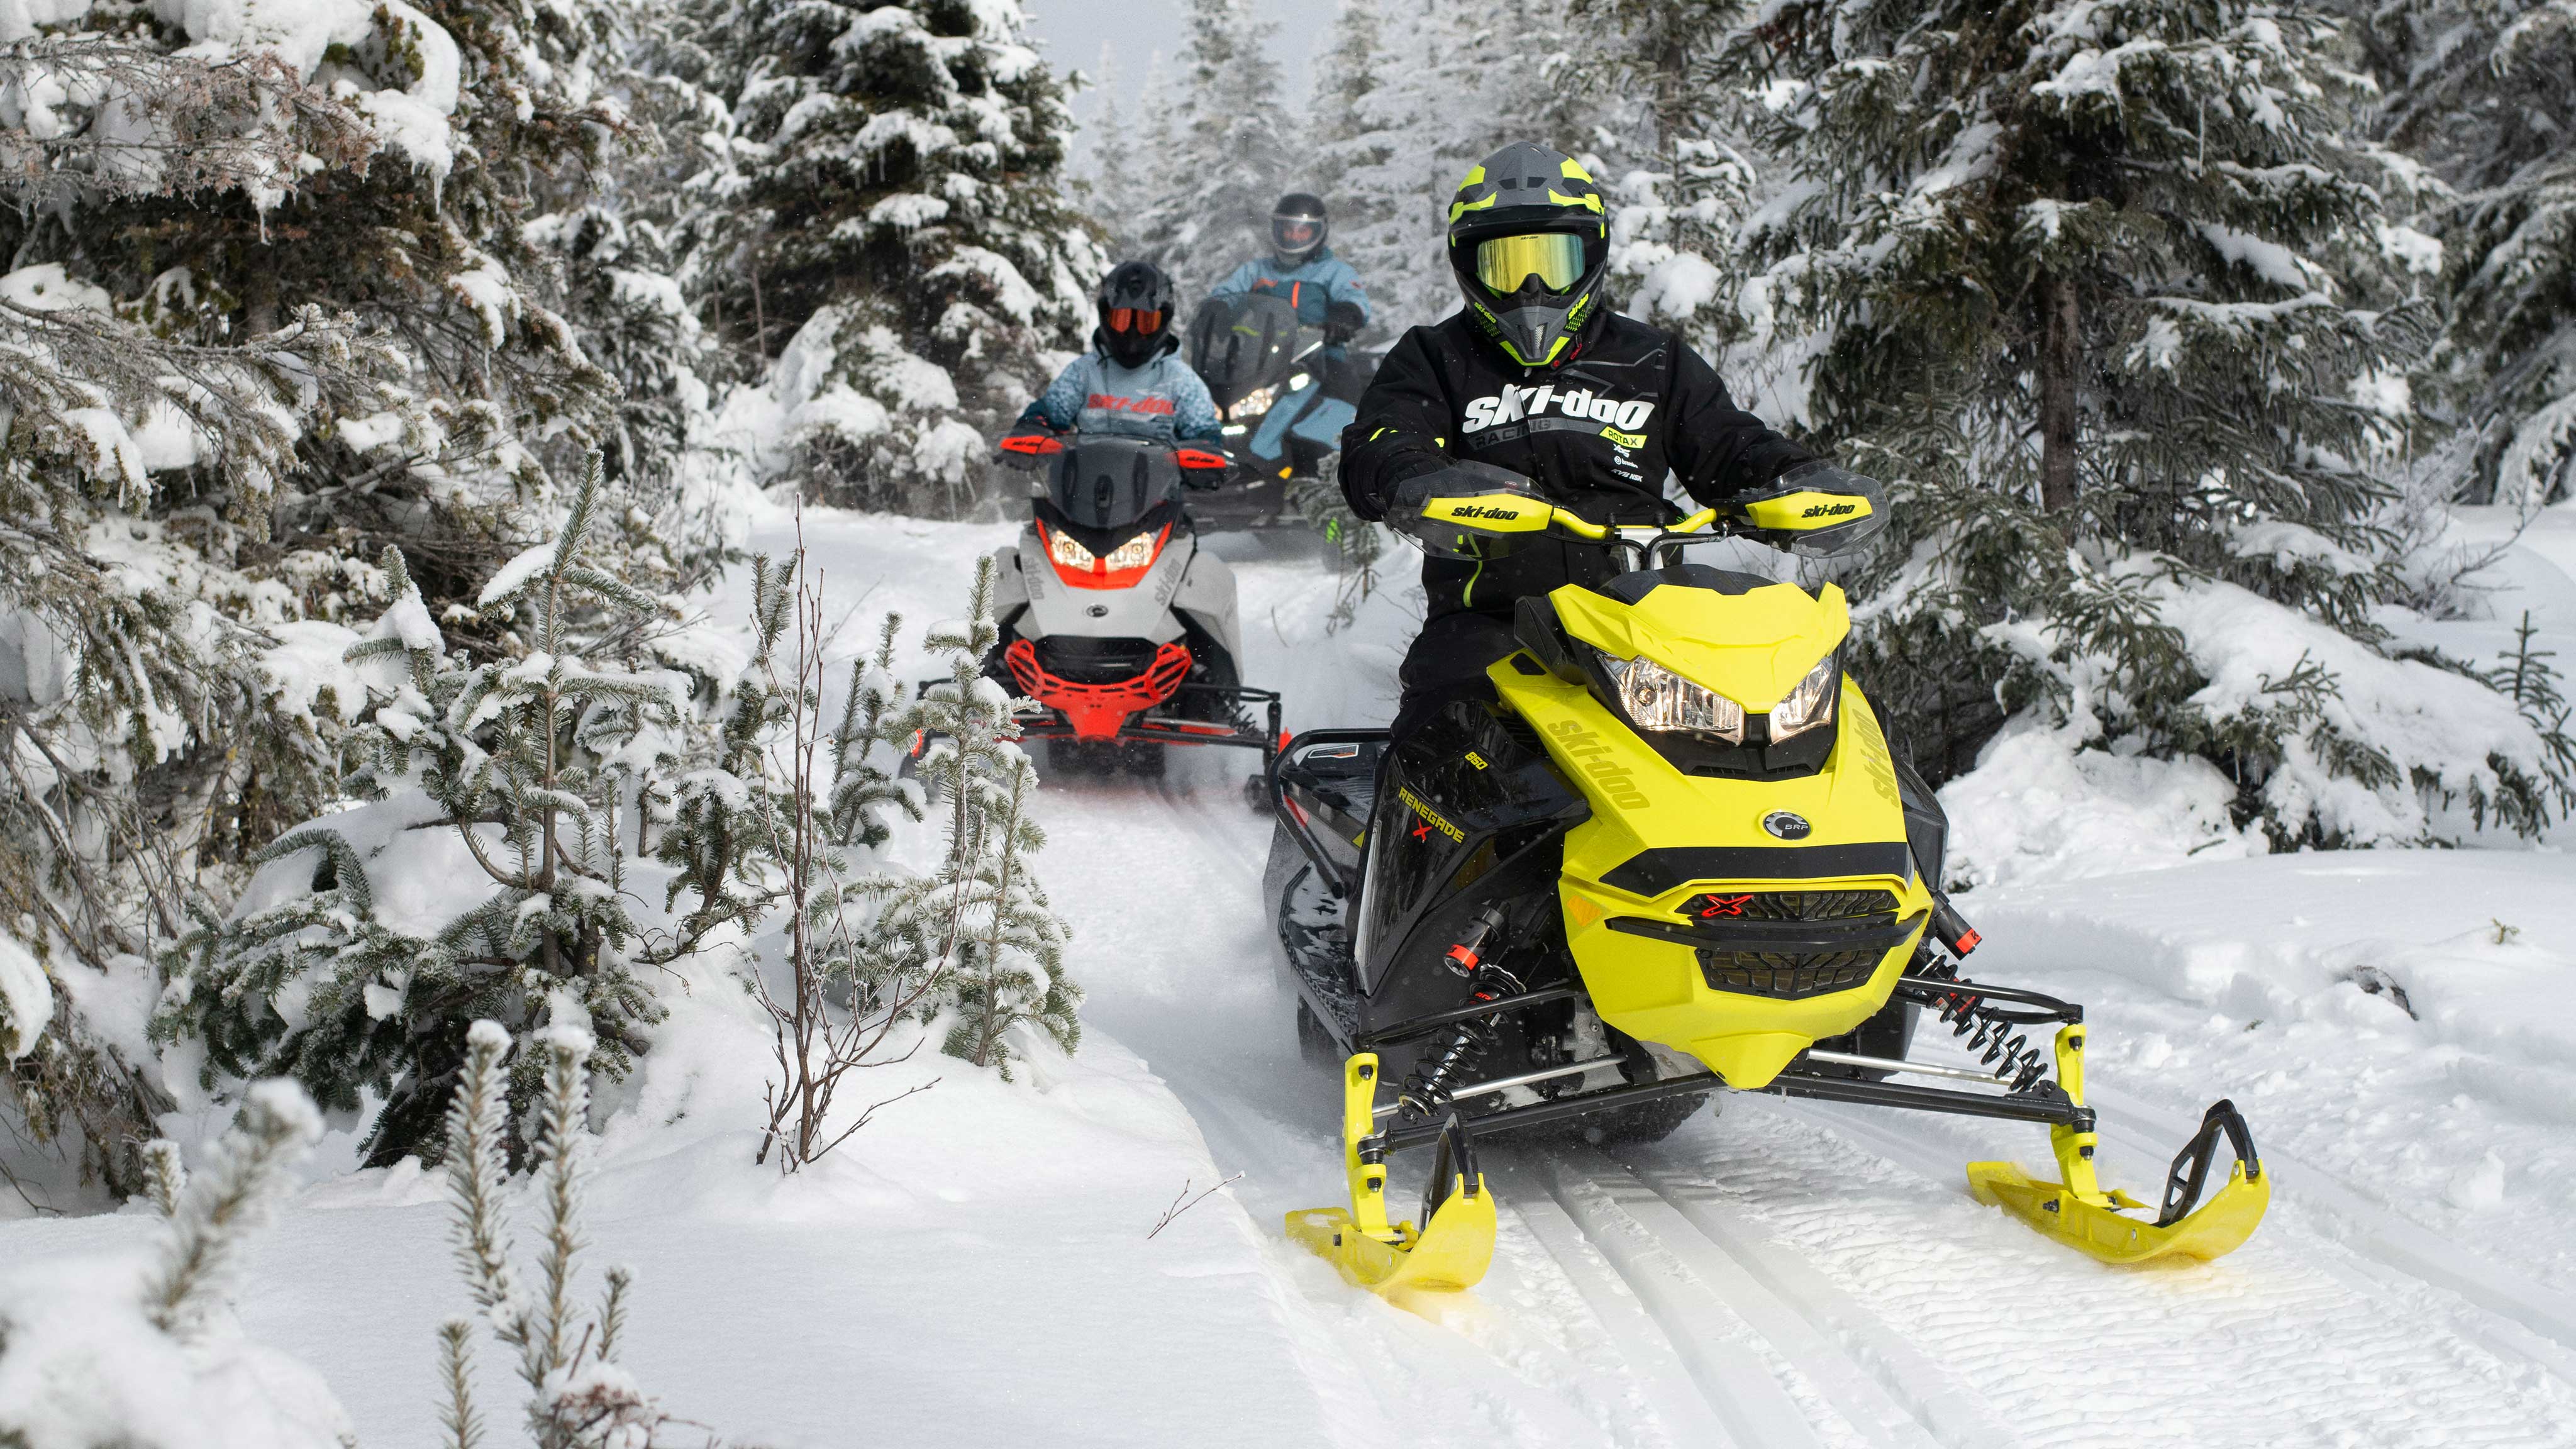 Group of riders driving the 2022 Ski-Doo lineup